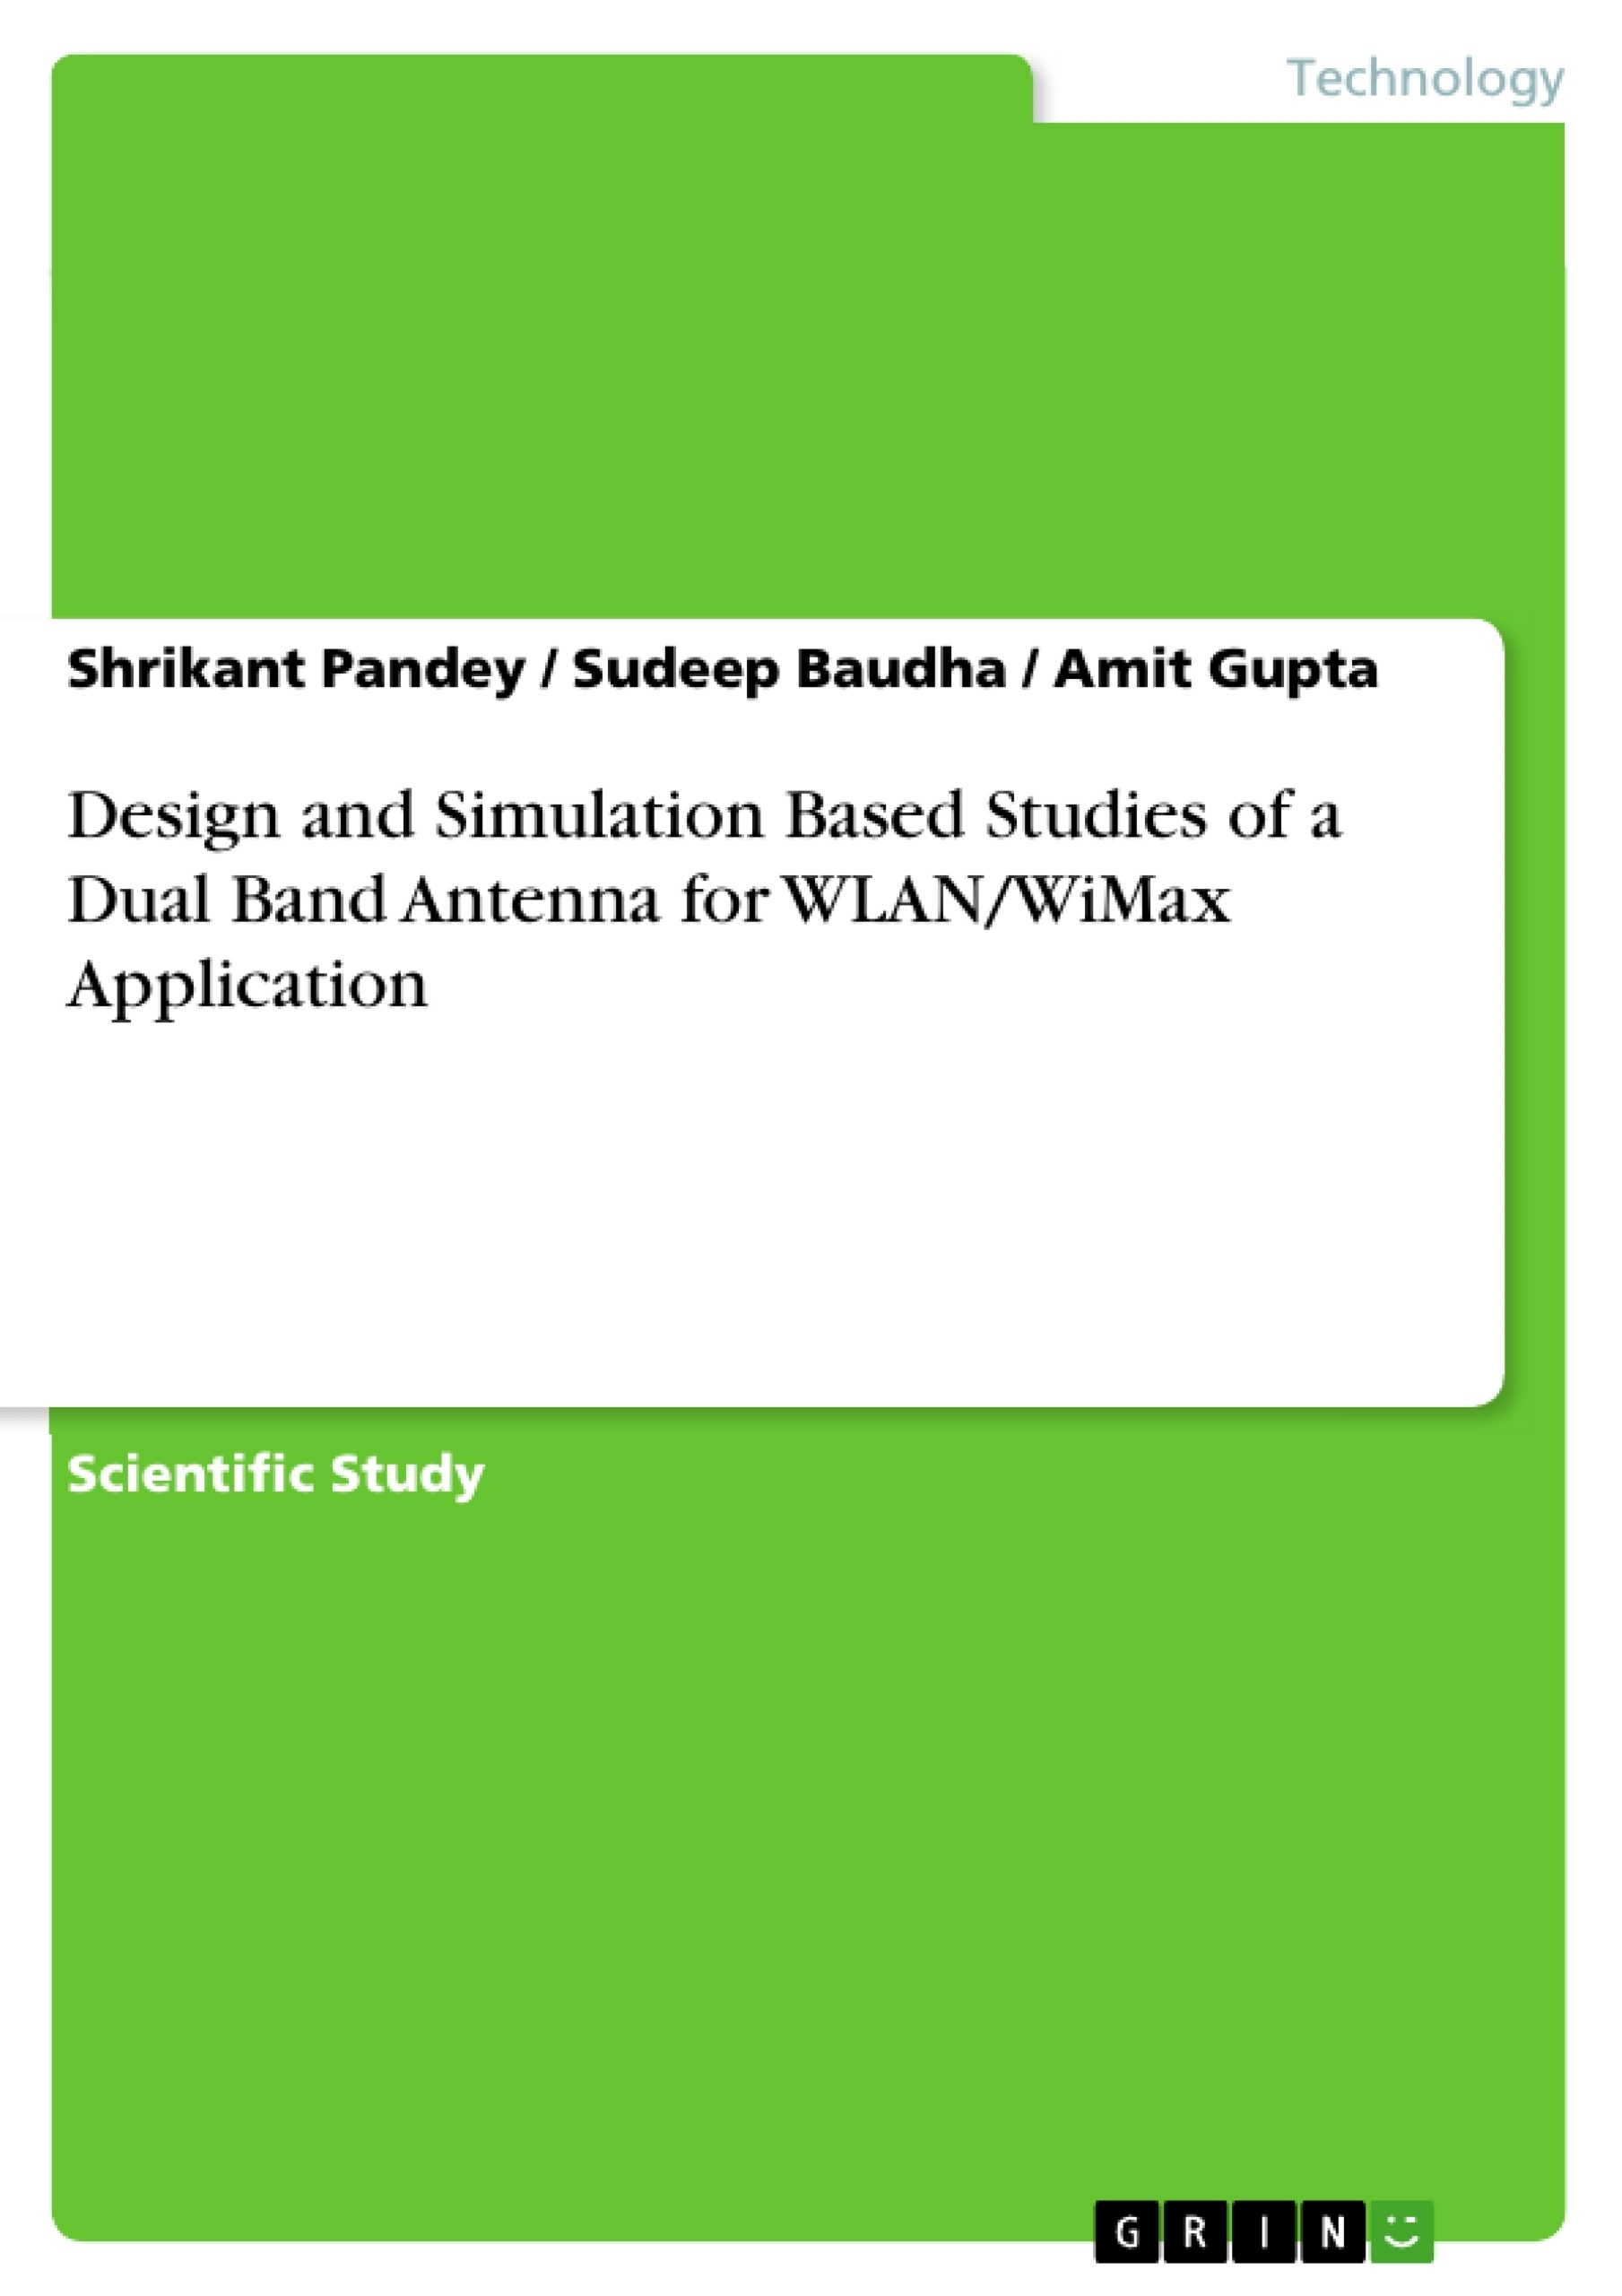 Title: Design and Simulation Based Studies of a Dual Band Antenna for WLAN/WiMax Application